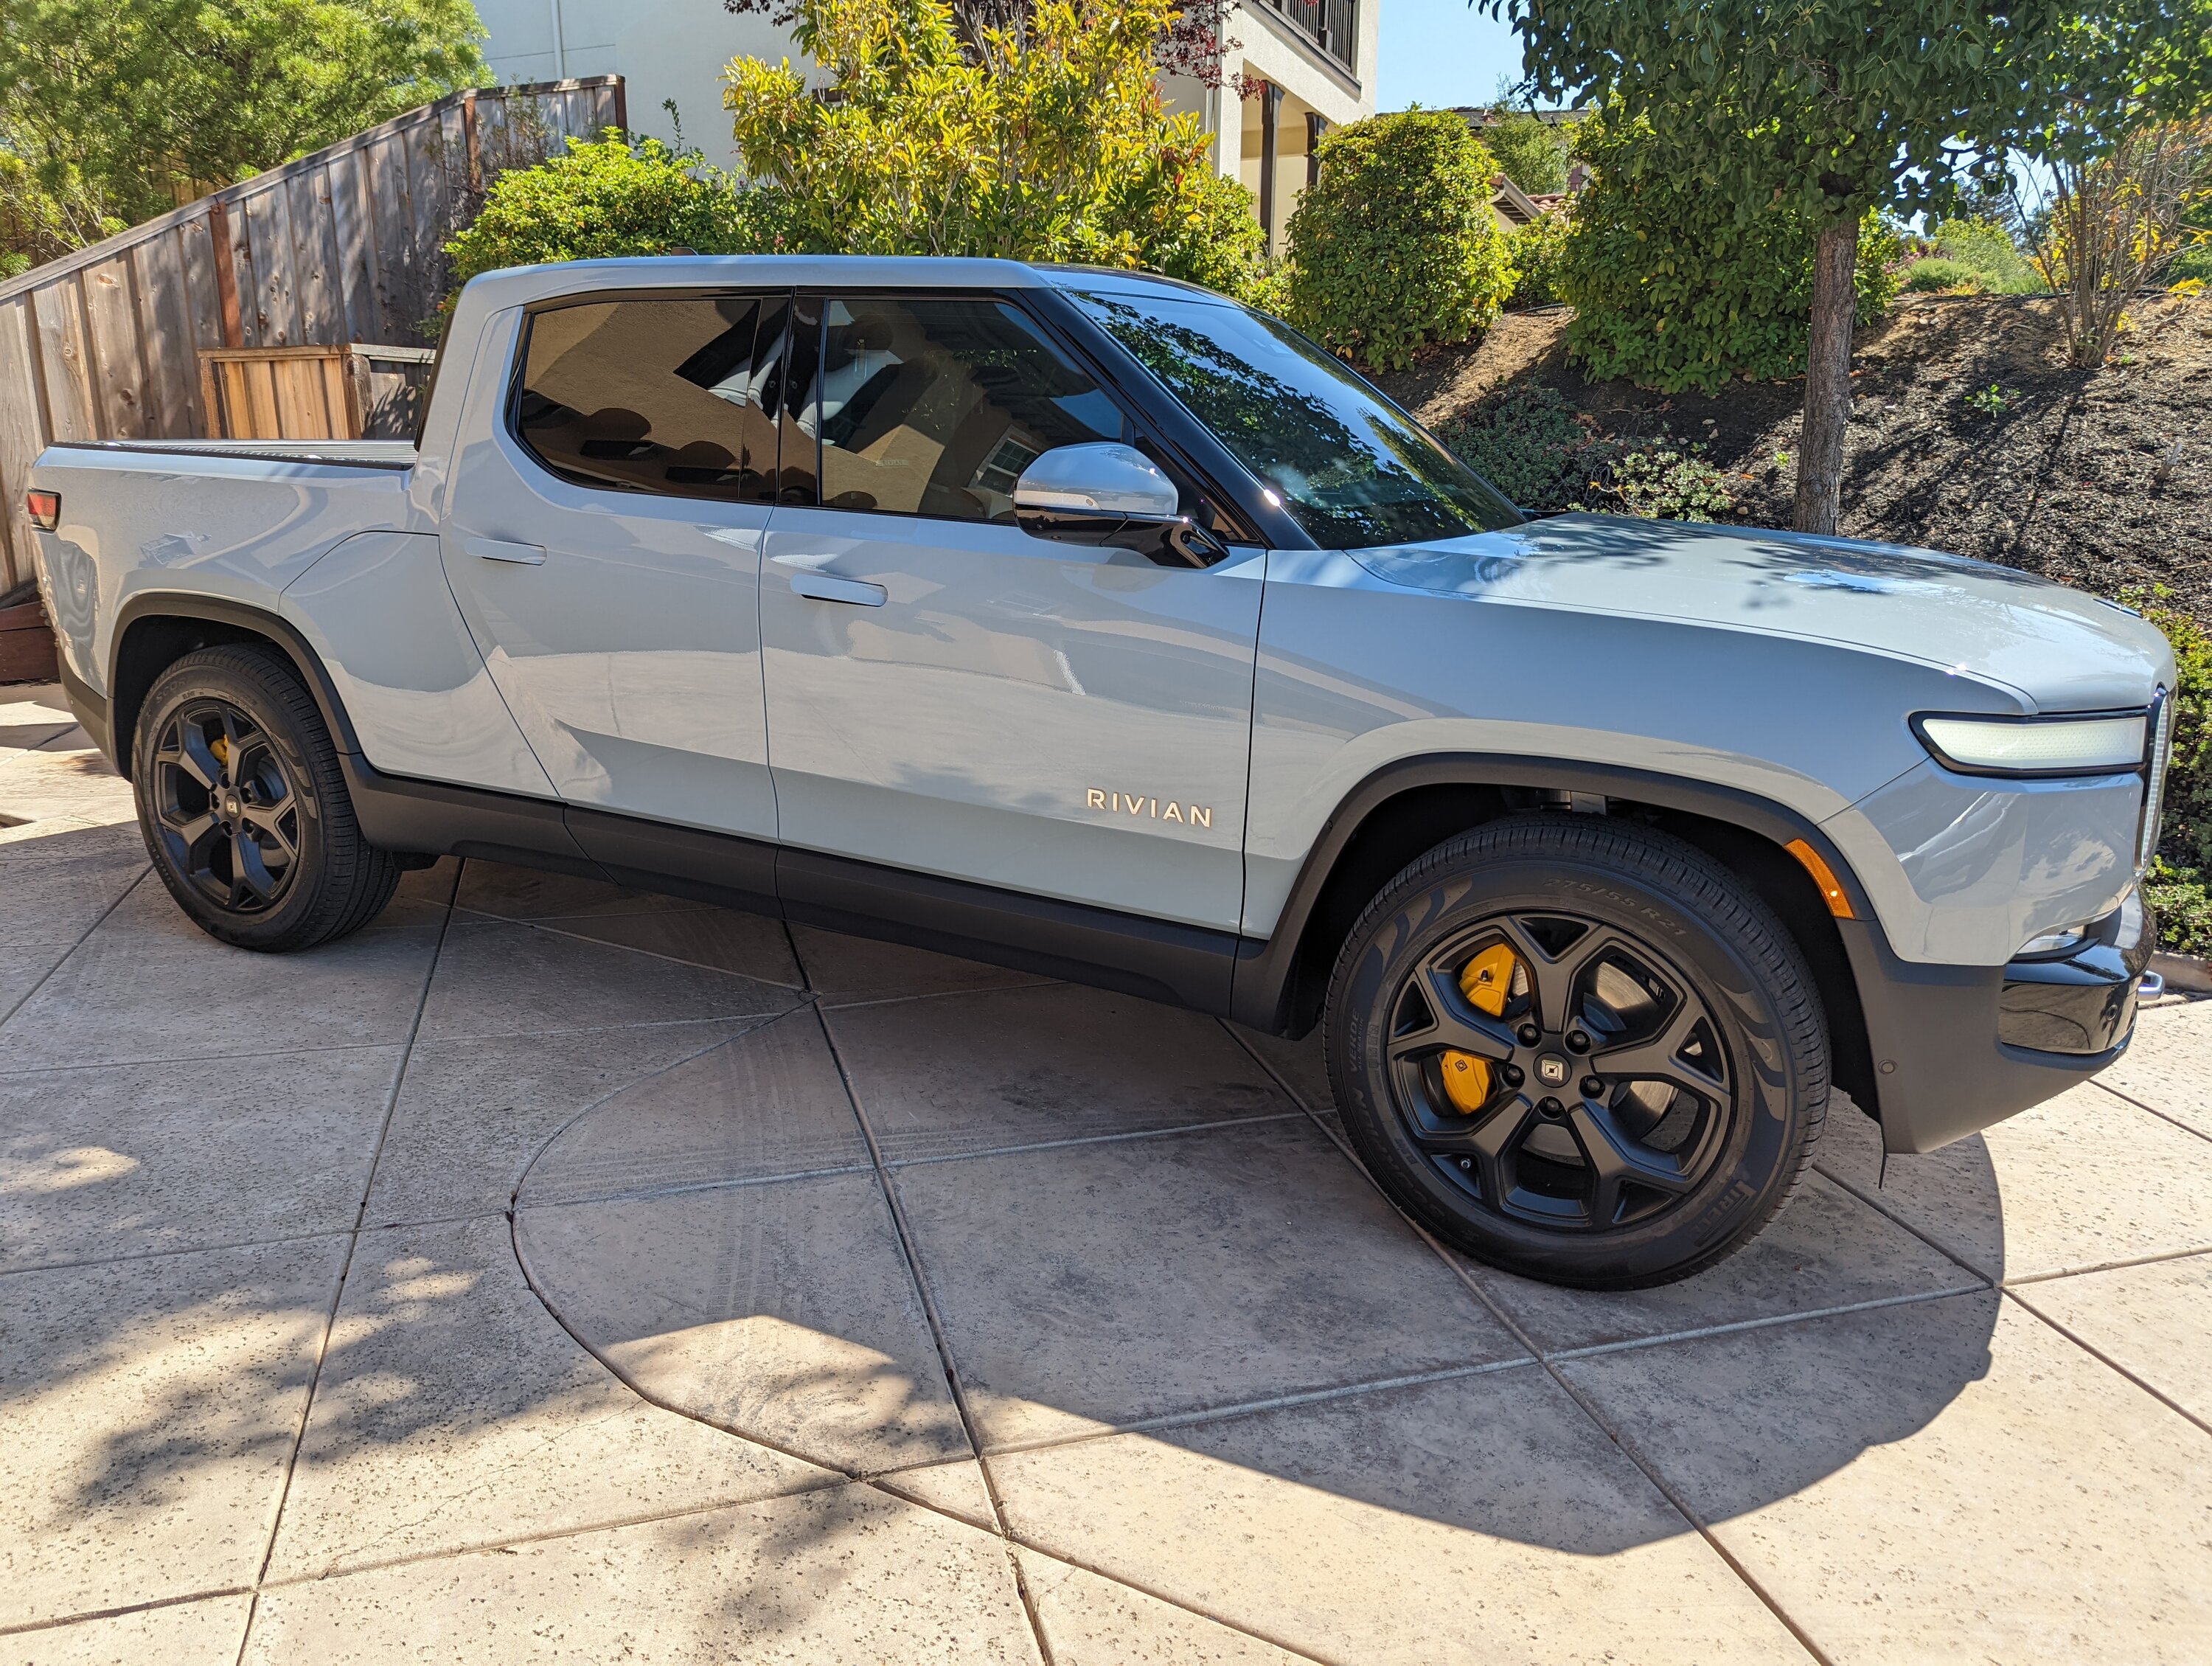 Rivian R1T R1S SOLD:  For Sale: 21" OEM Wheels & Tires PXL_20220804_174942728